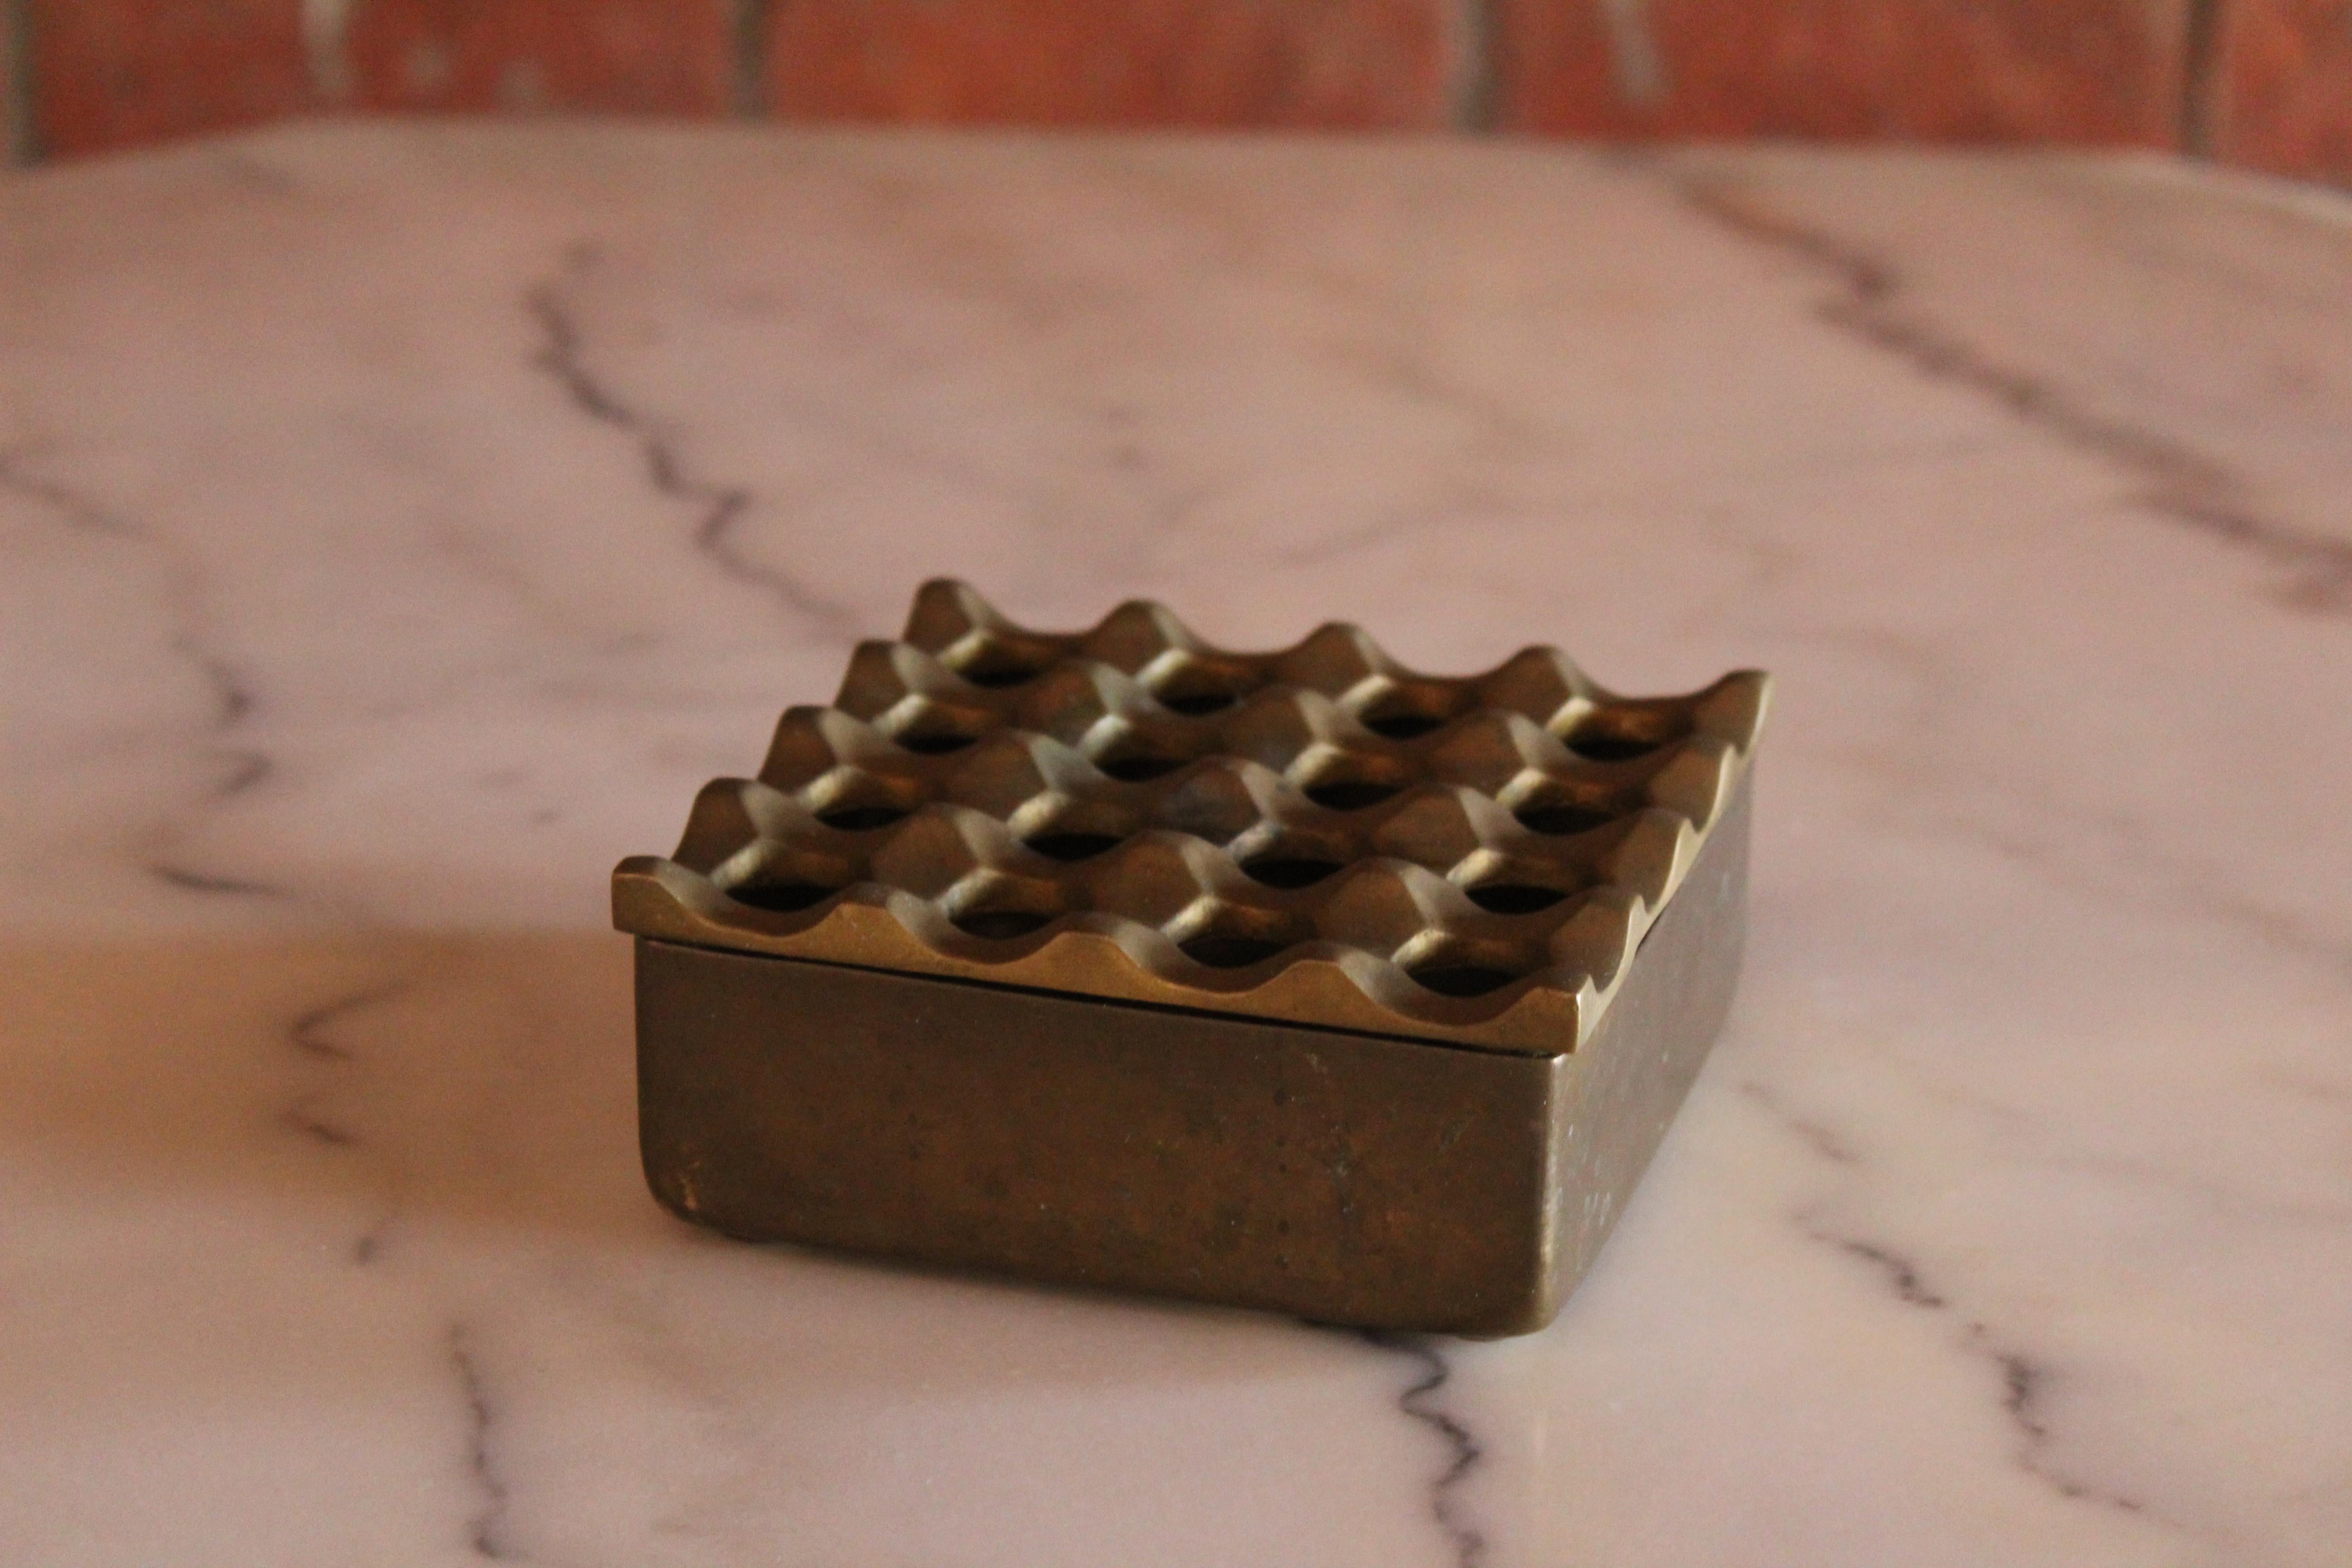 A vintage Ljungberg & Bäckström Ultima ashtray in solid brass. Made for Various Ting and designed by Holger Bäckström &Bo Ljungberg in the 1960s- made in Sweden. Wonderful condition with patina.